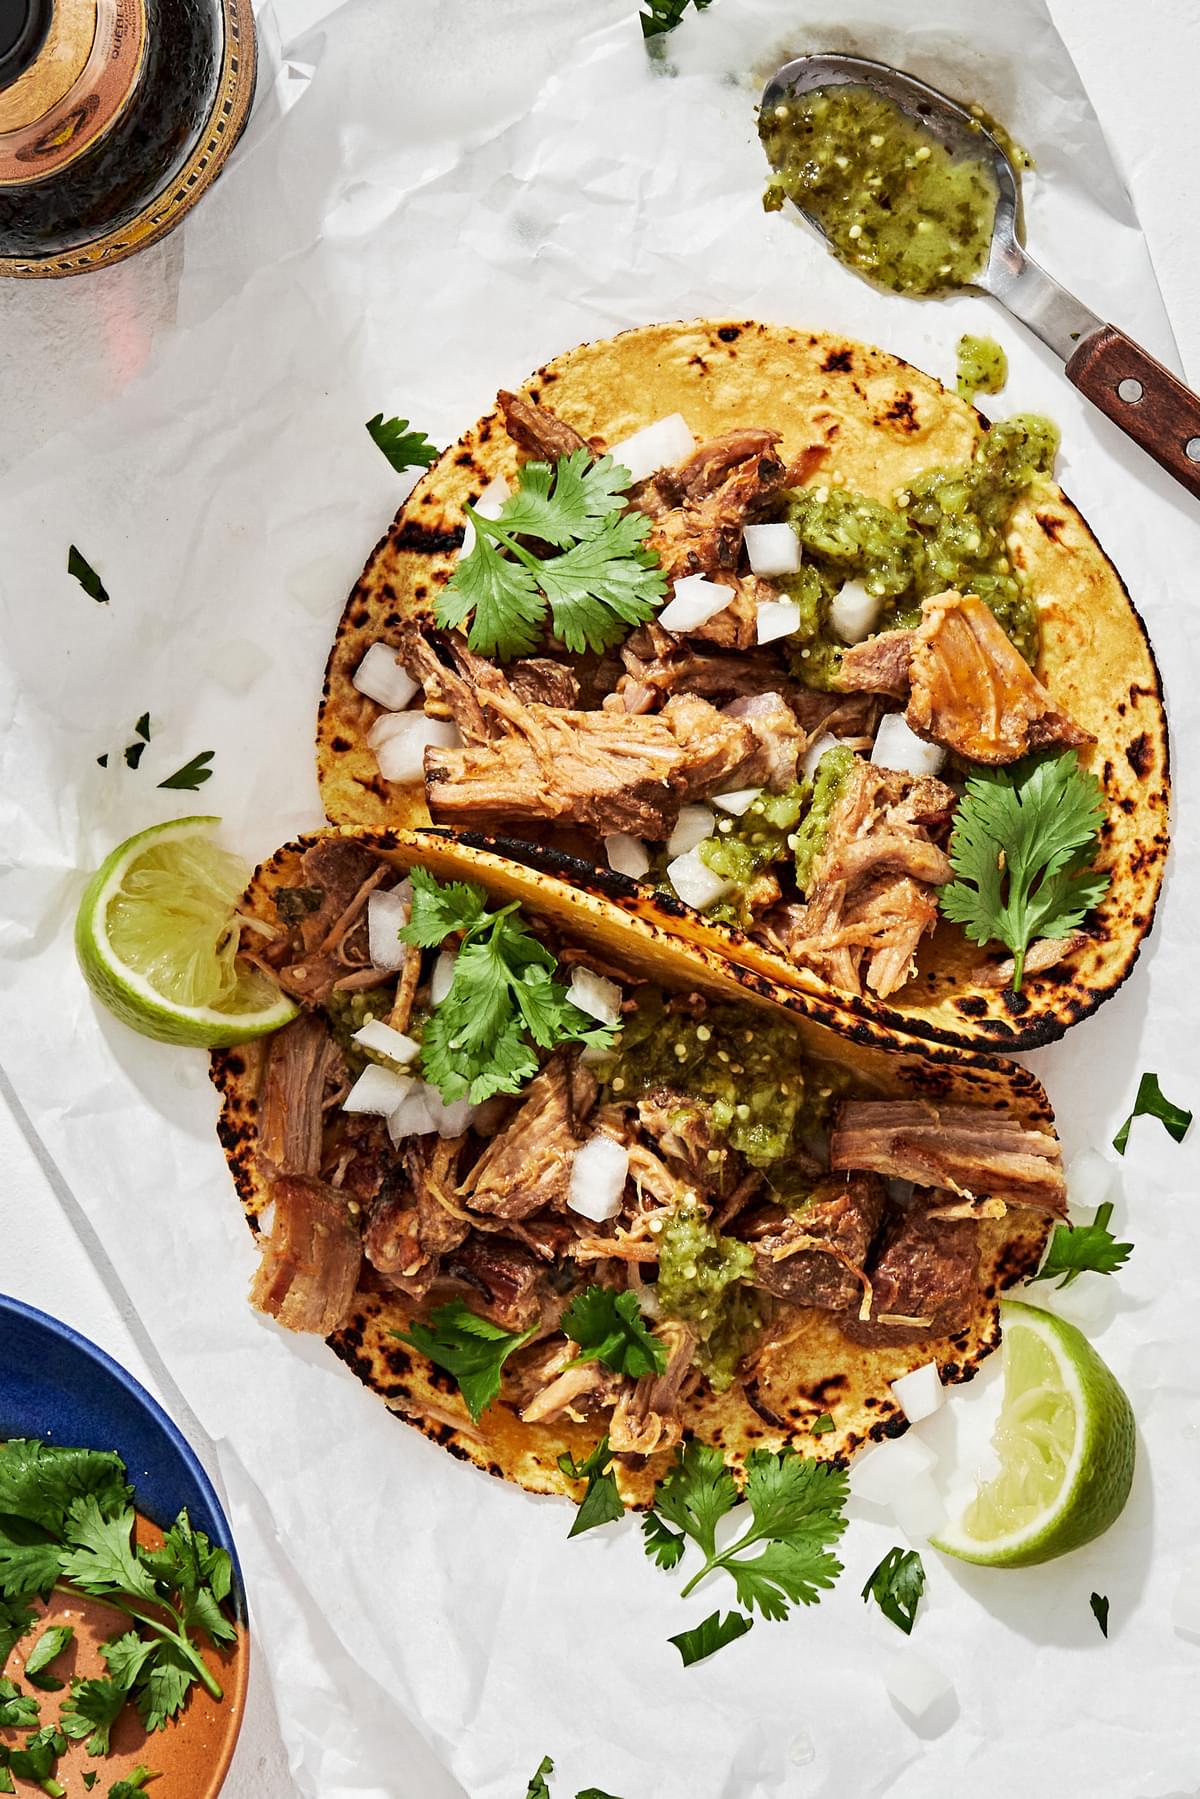 crispy carnitas tacos in homemade corn tortillas topped with onion, cilantro and salsa verde served with lime wedges